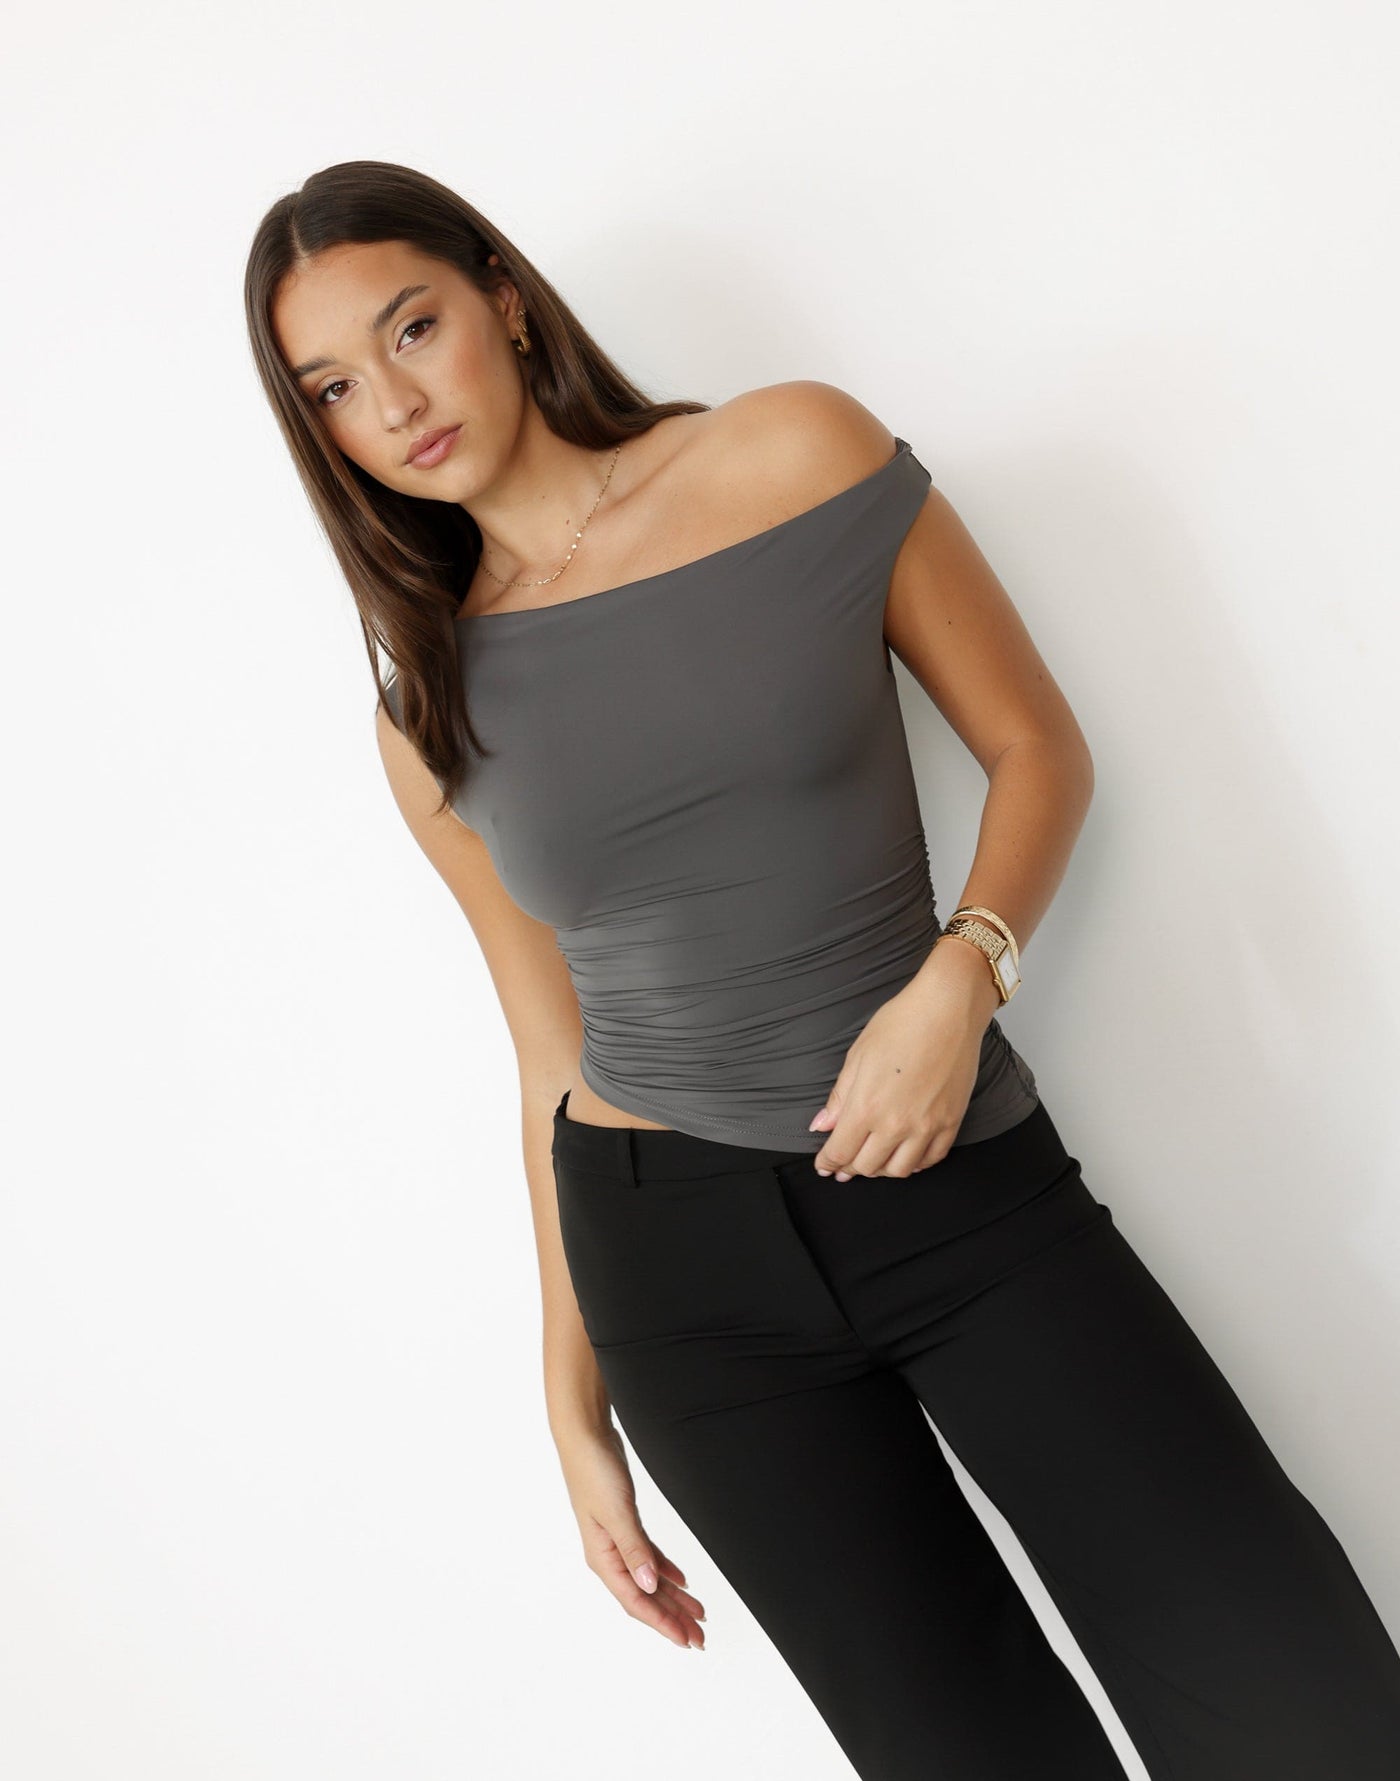 Namiko Top (White) | Charcoal Clothing Exclusive - - Women's Top - Charcoal Clothing